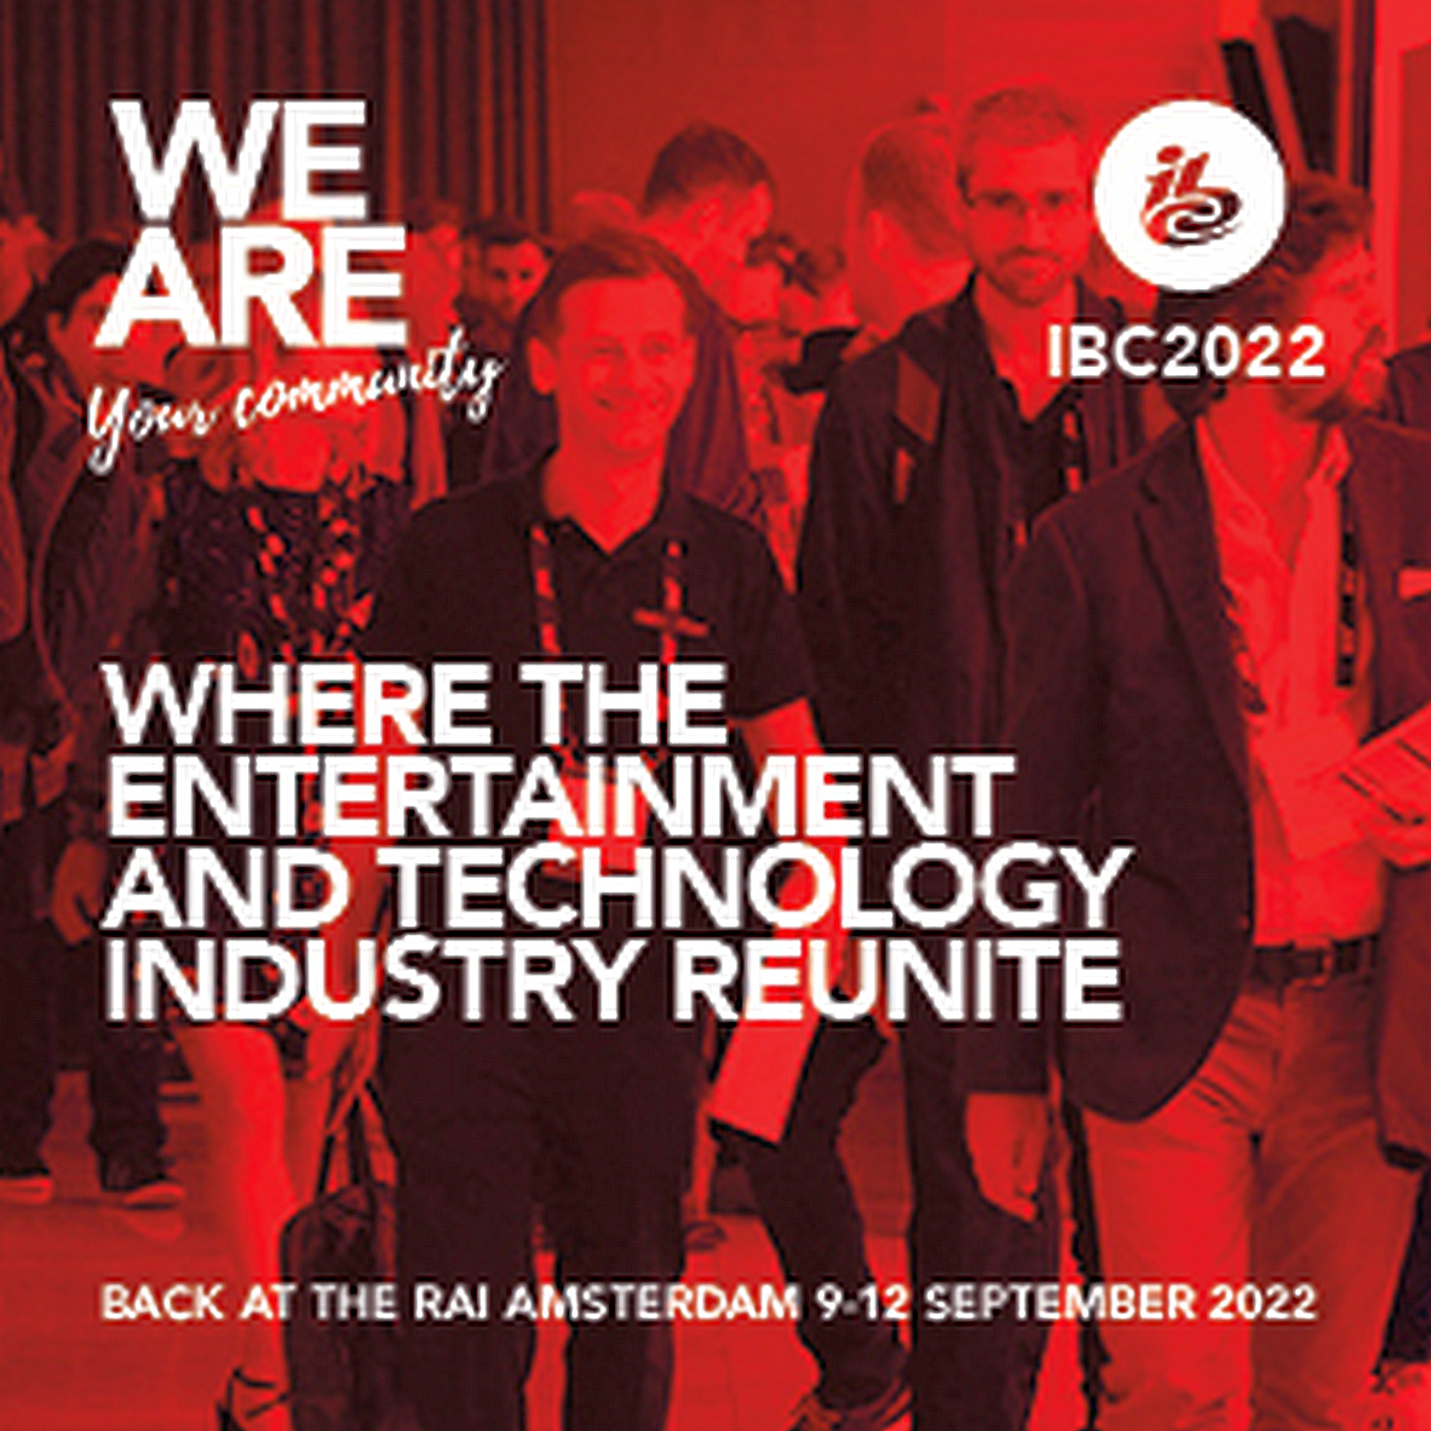 IBC2022 advertising for the live event in Amsterdam